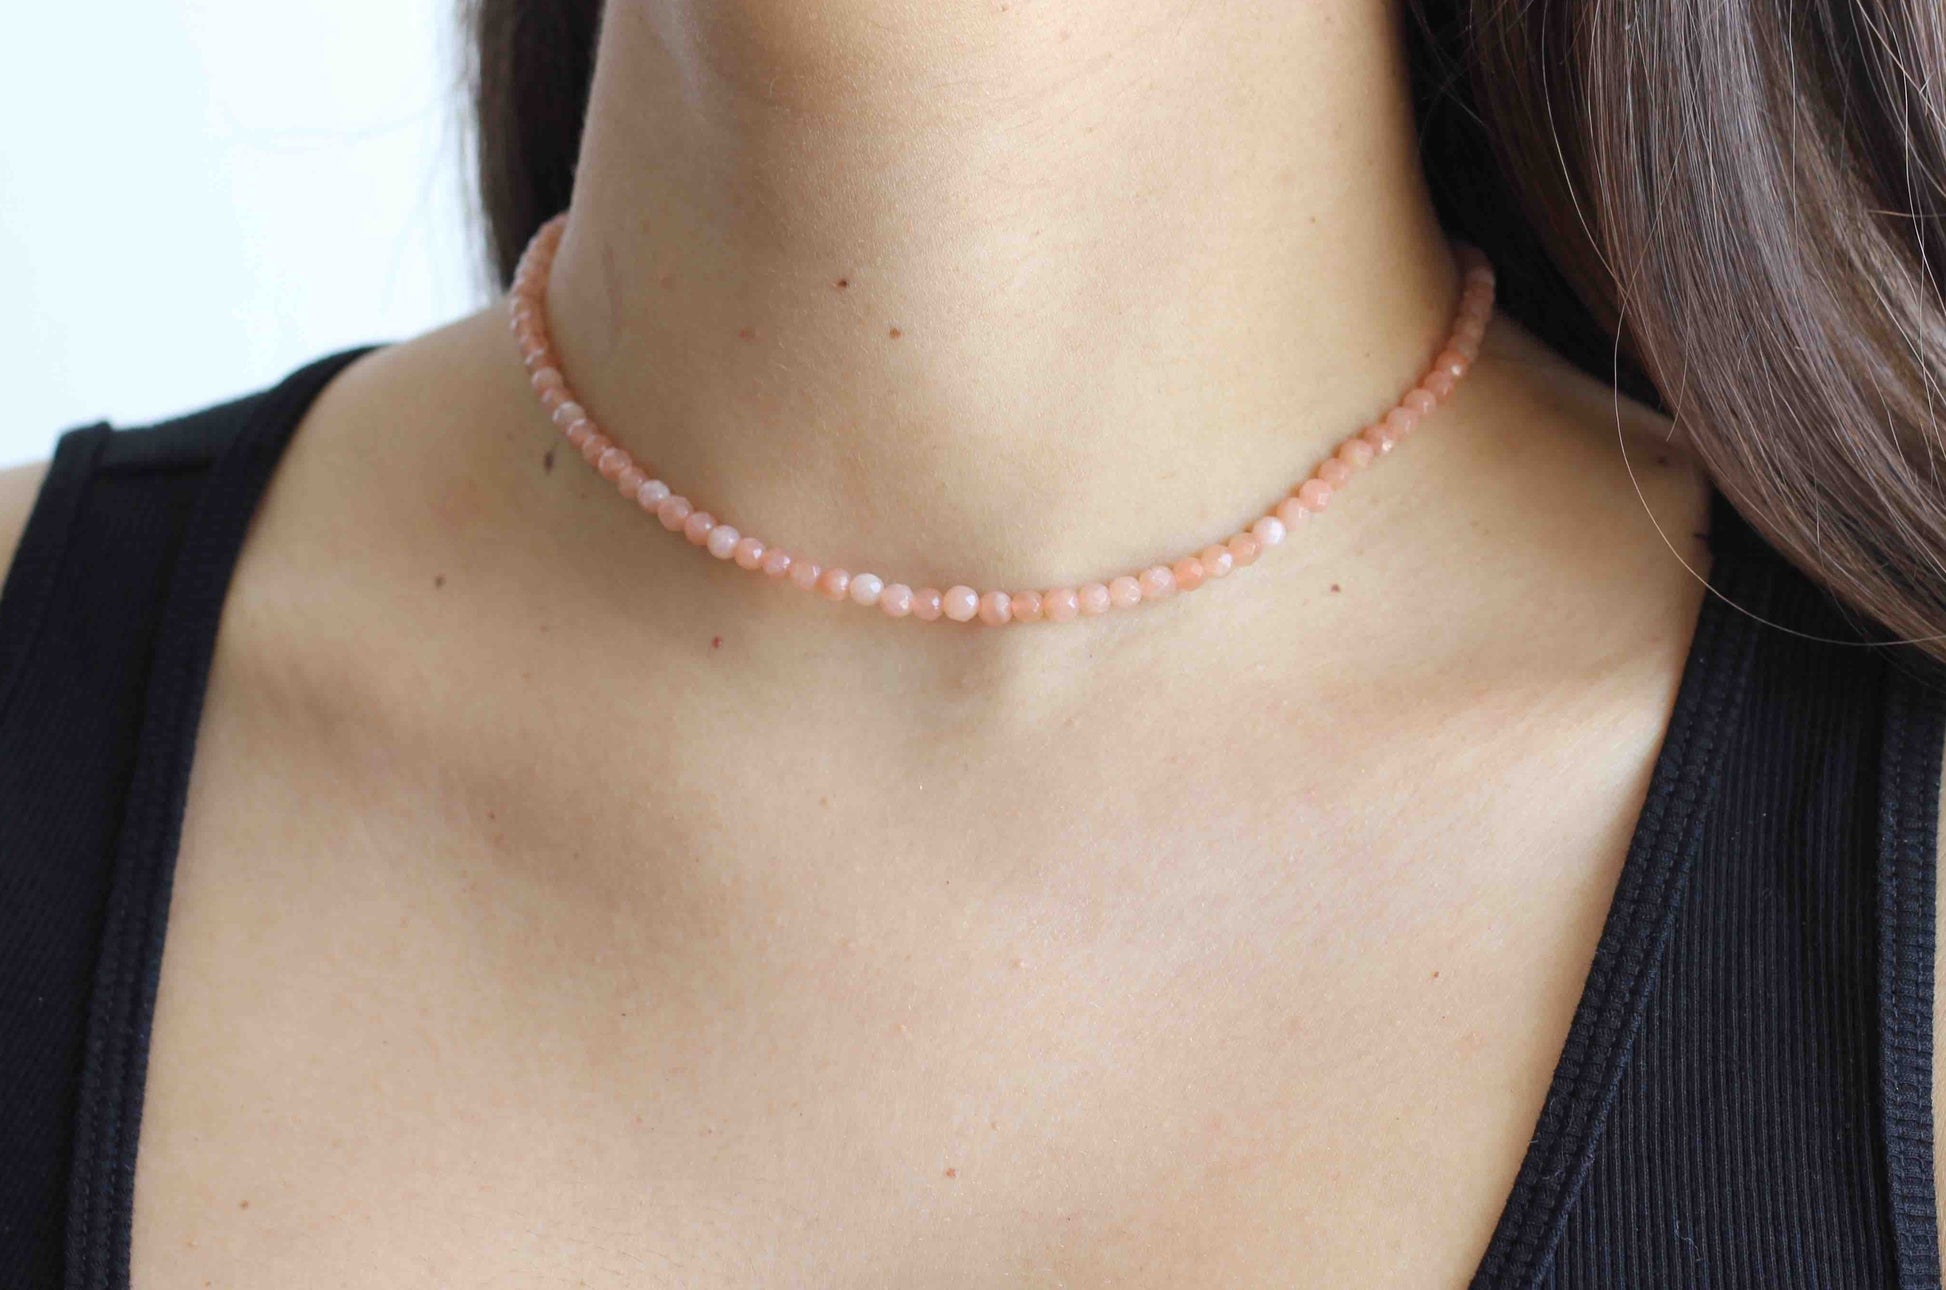 Handmade Minimalist Pink Moonstone 4mm Beaded Gemstone Choker Necklace with Sterling Silver Closure